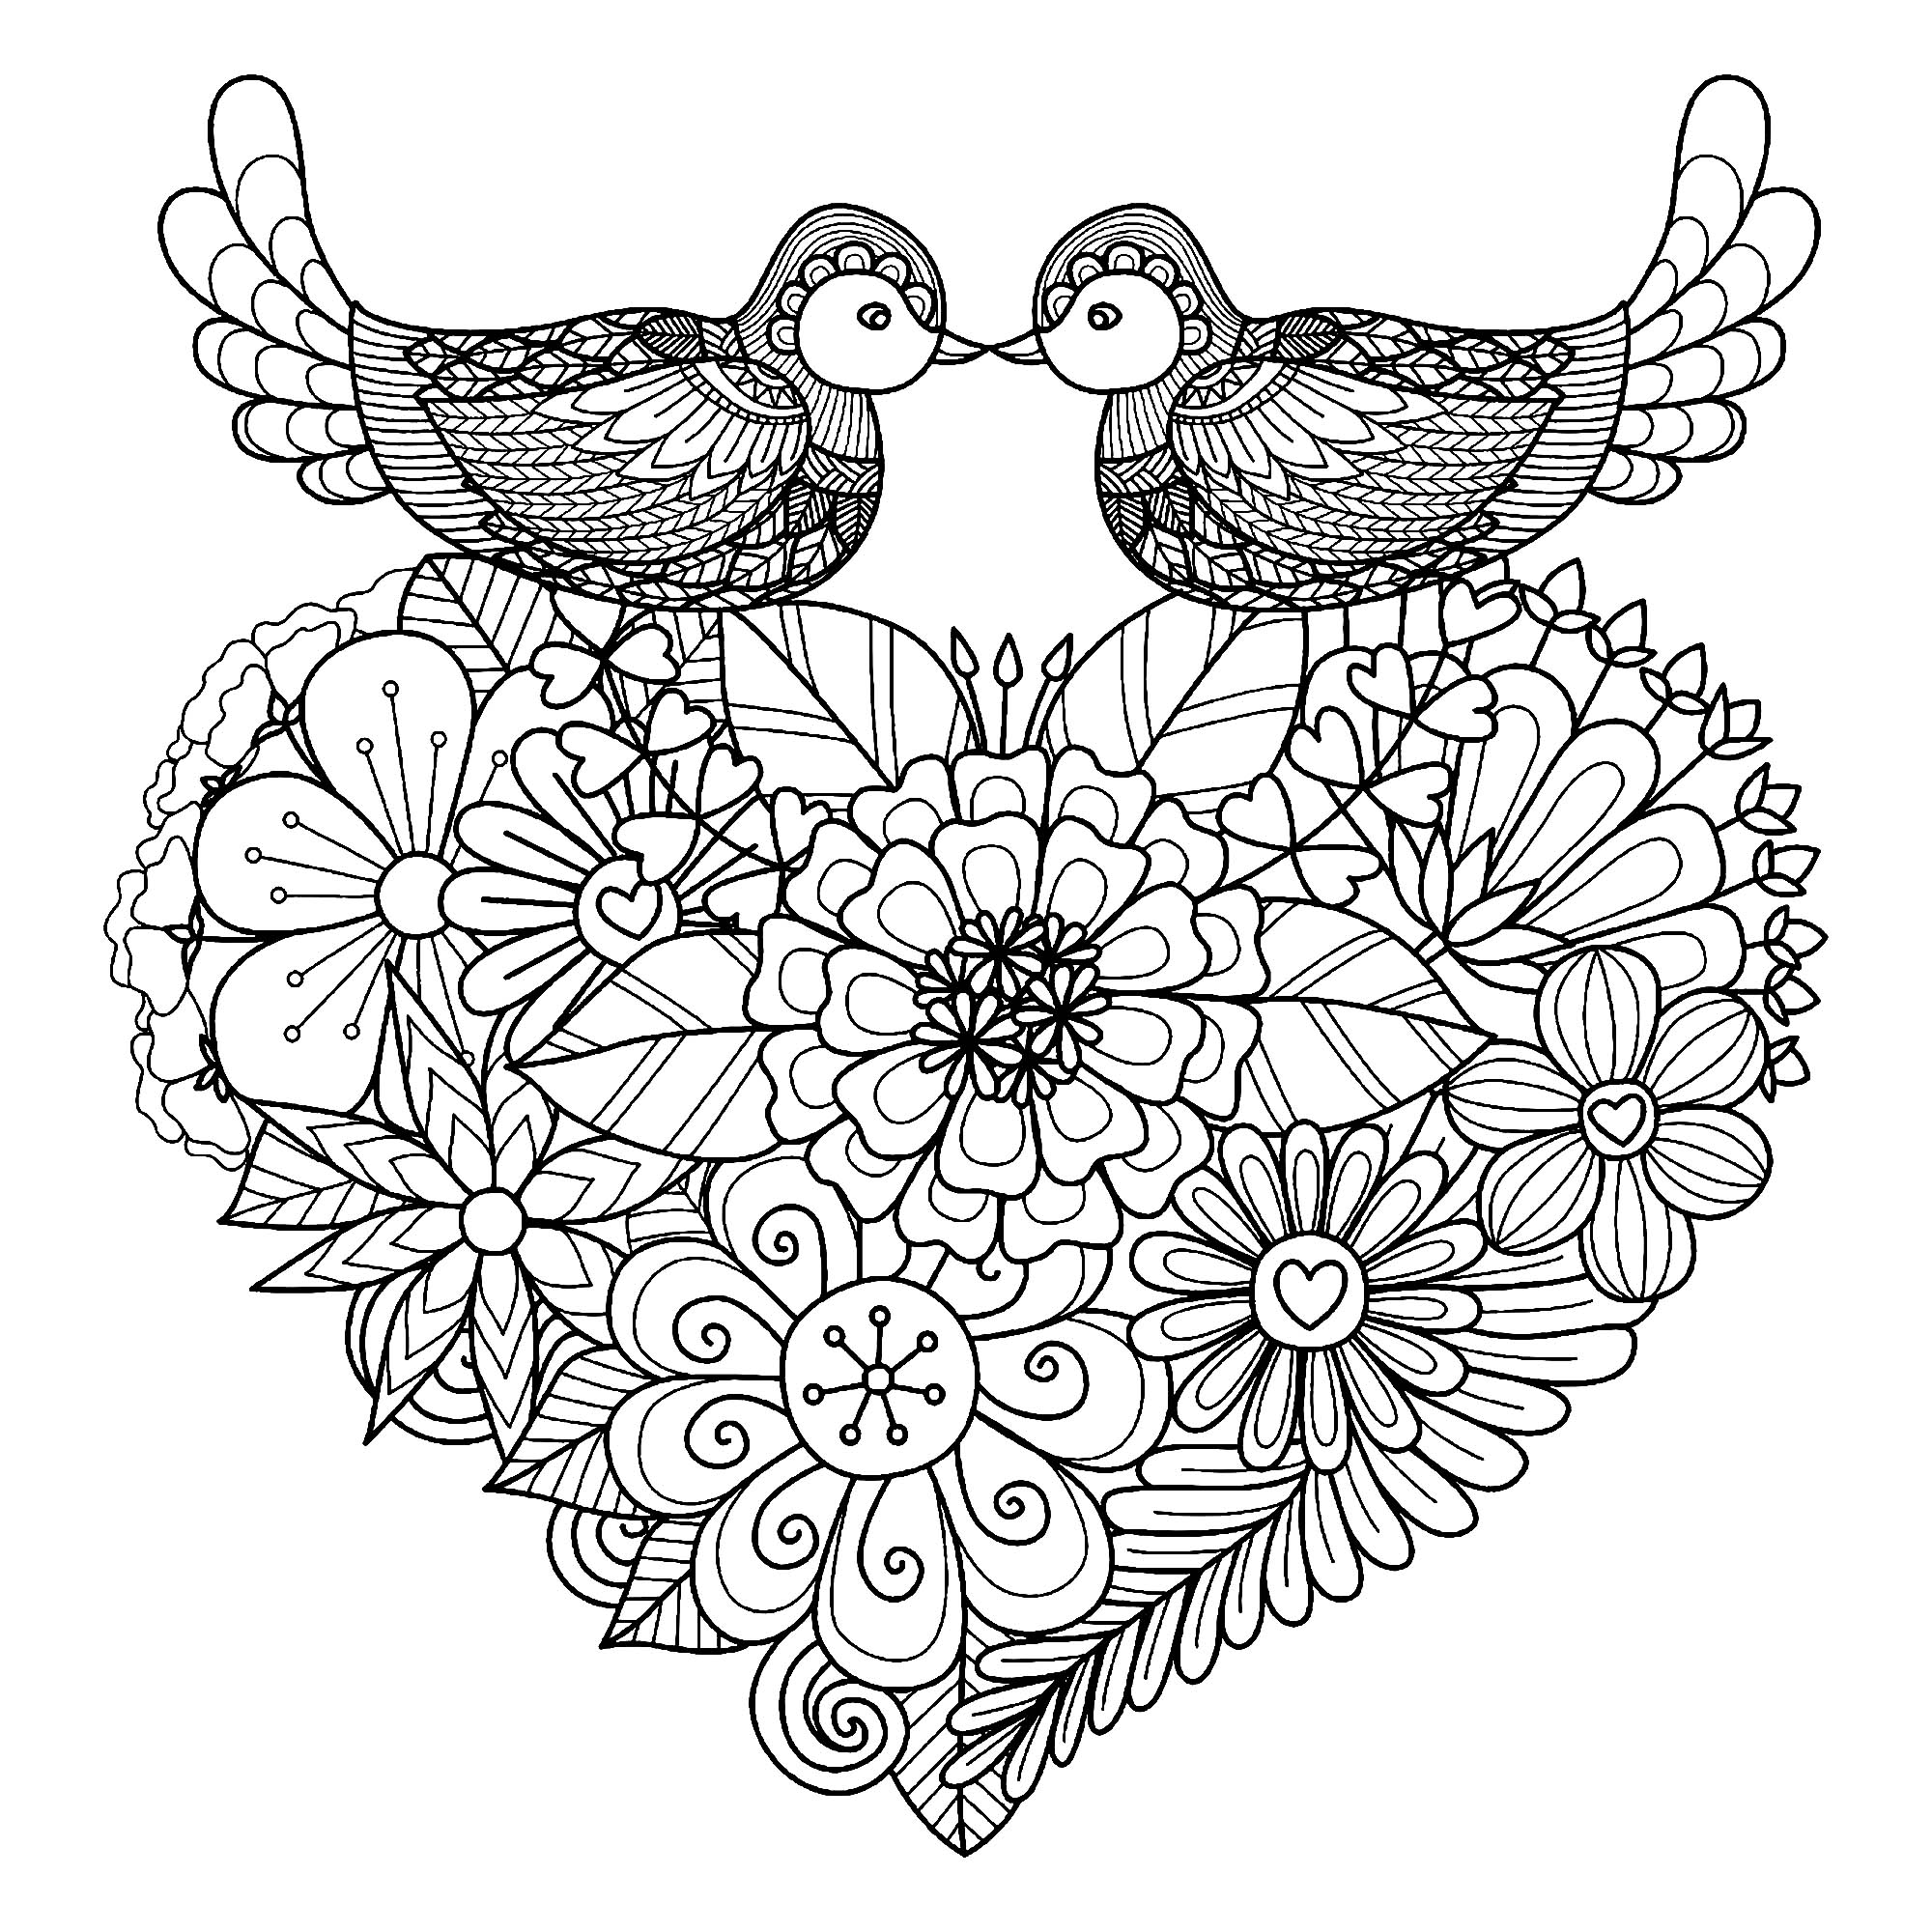 Download Heart and two birds - Valentine's Day Adult Coloring Pages